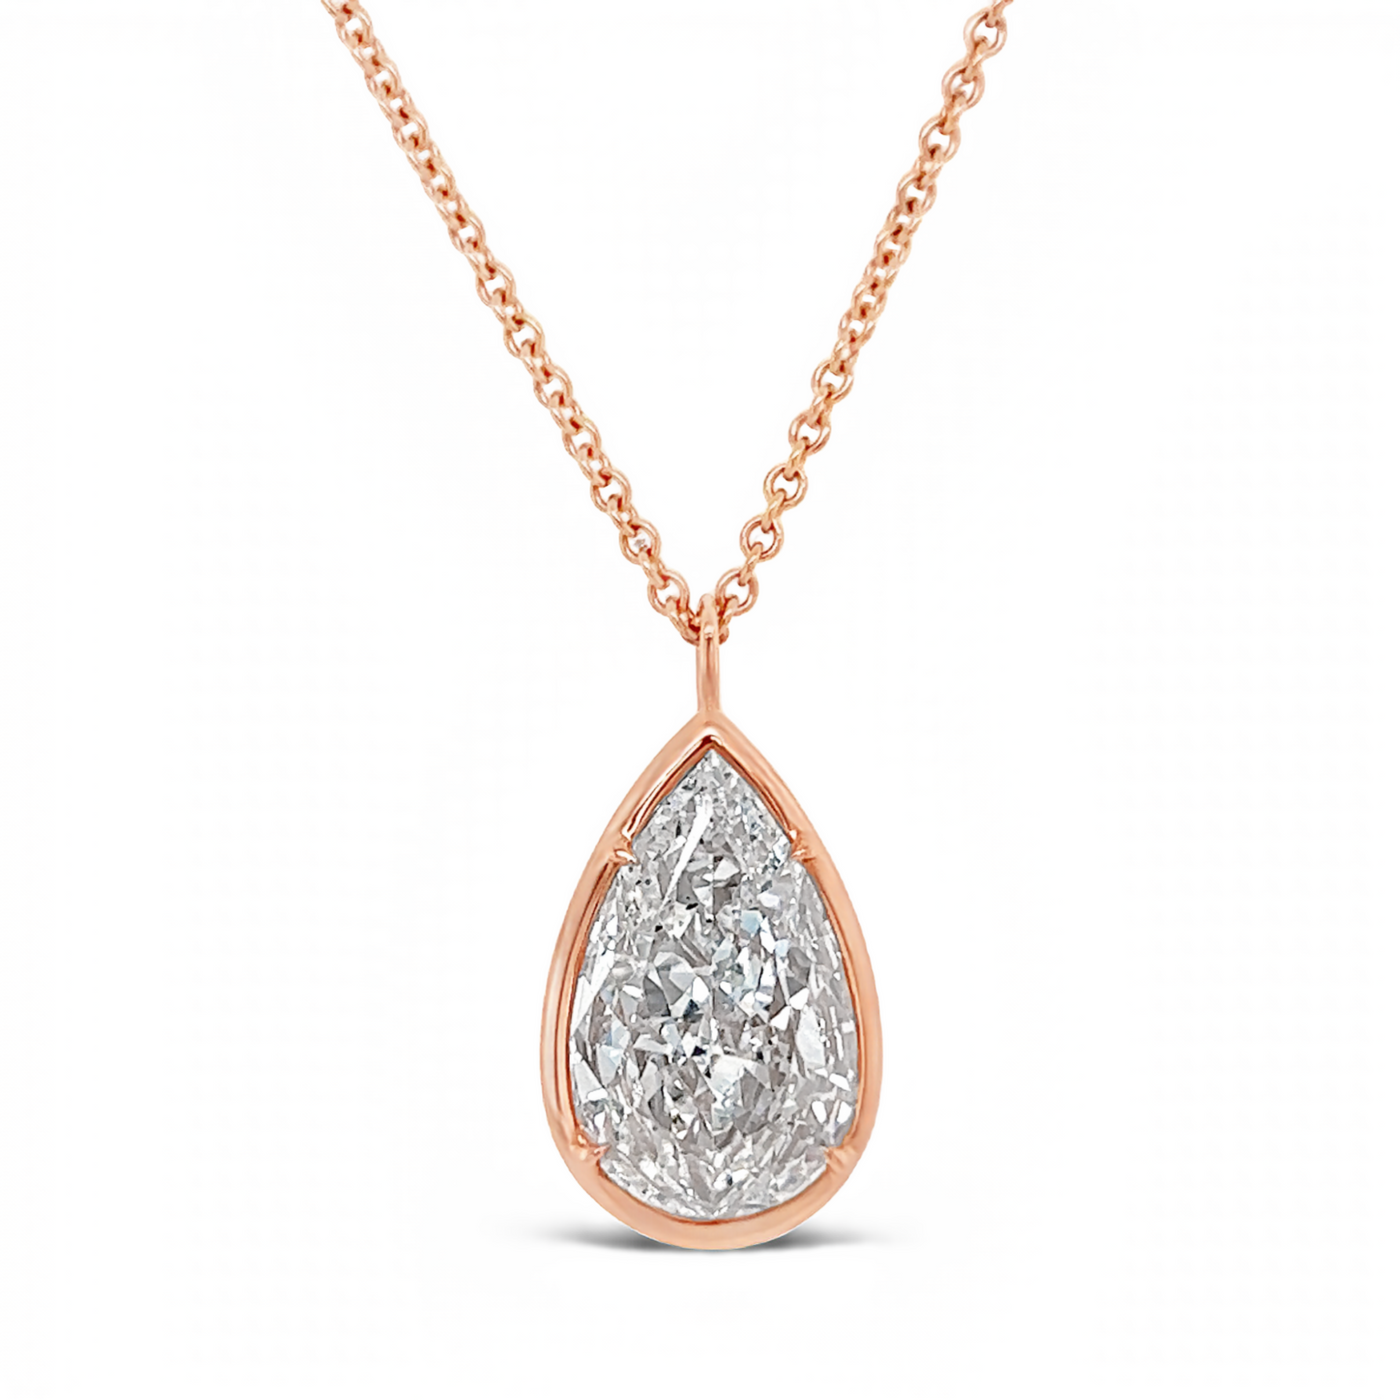 5.03ct Pear Shaped Pendant Necklace